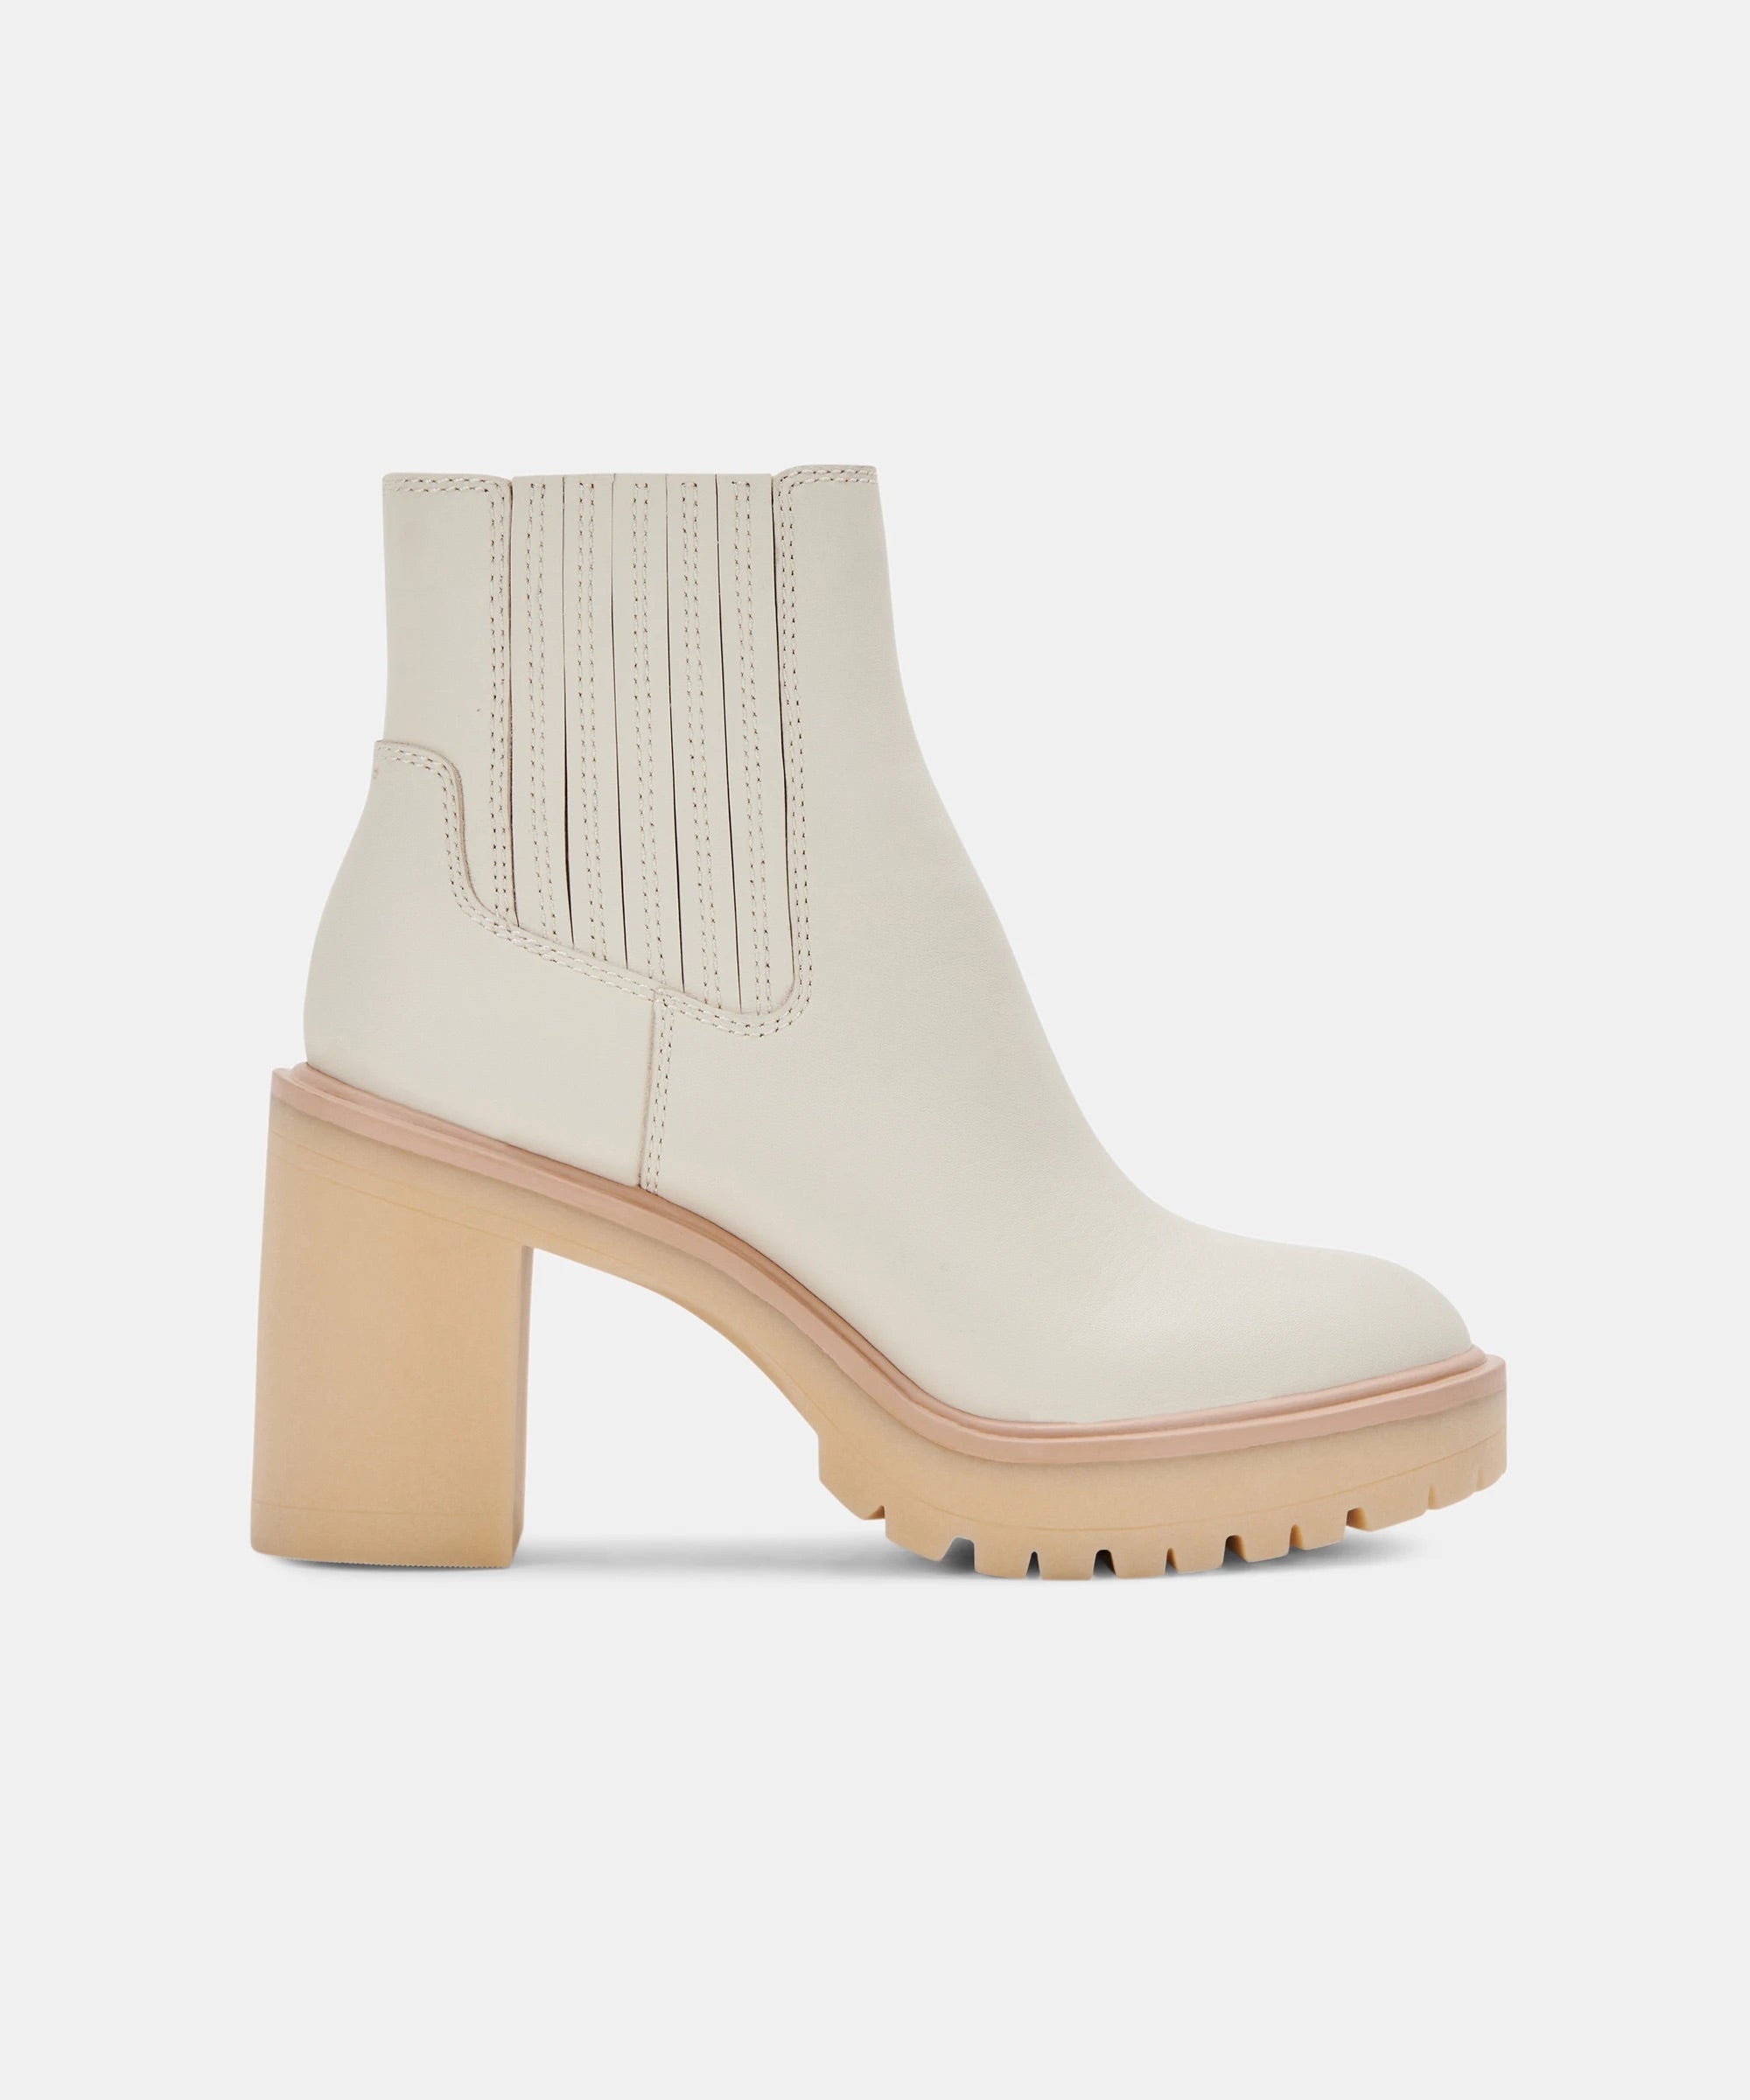 Caster H2O Booties in Ivory Leather - Glow